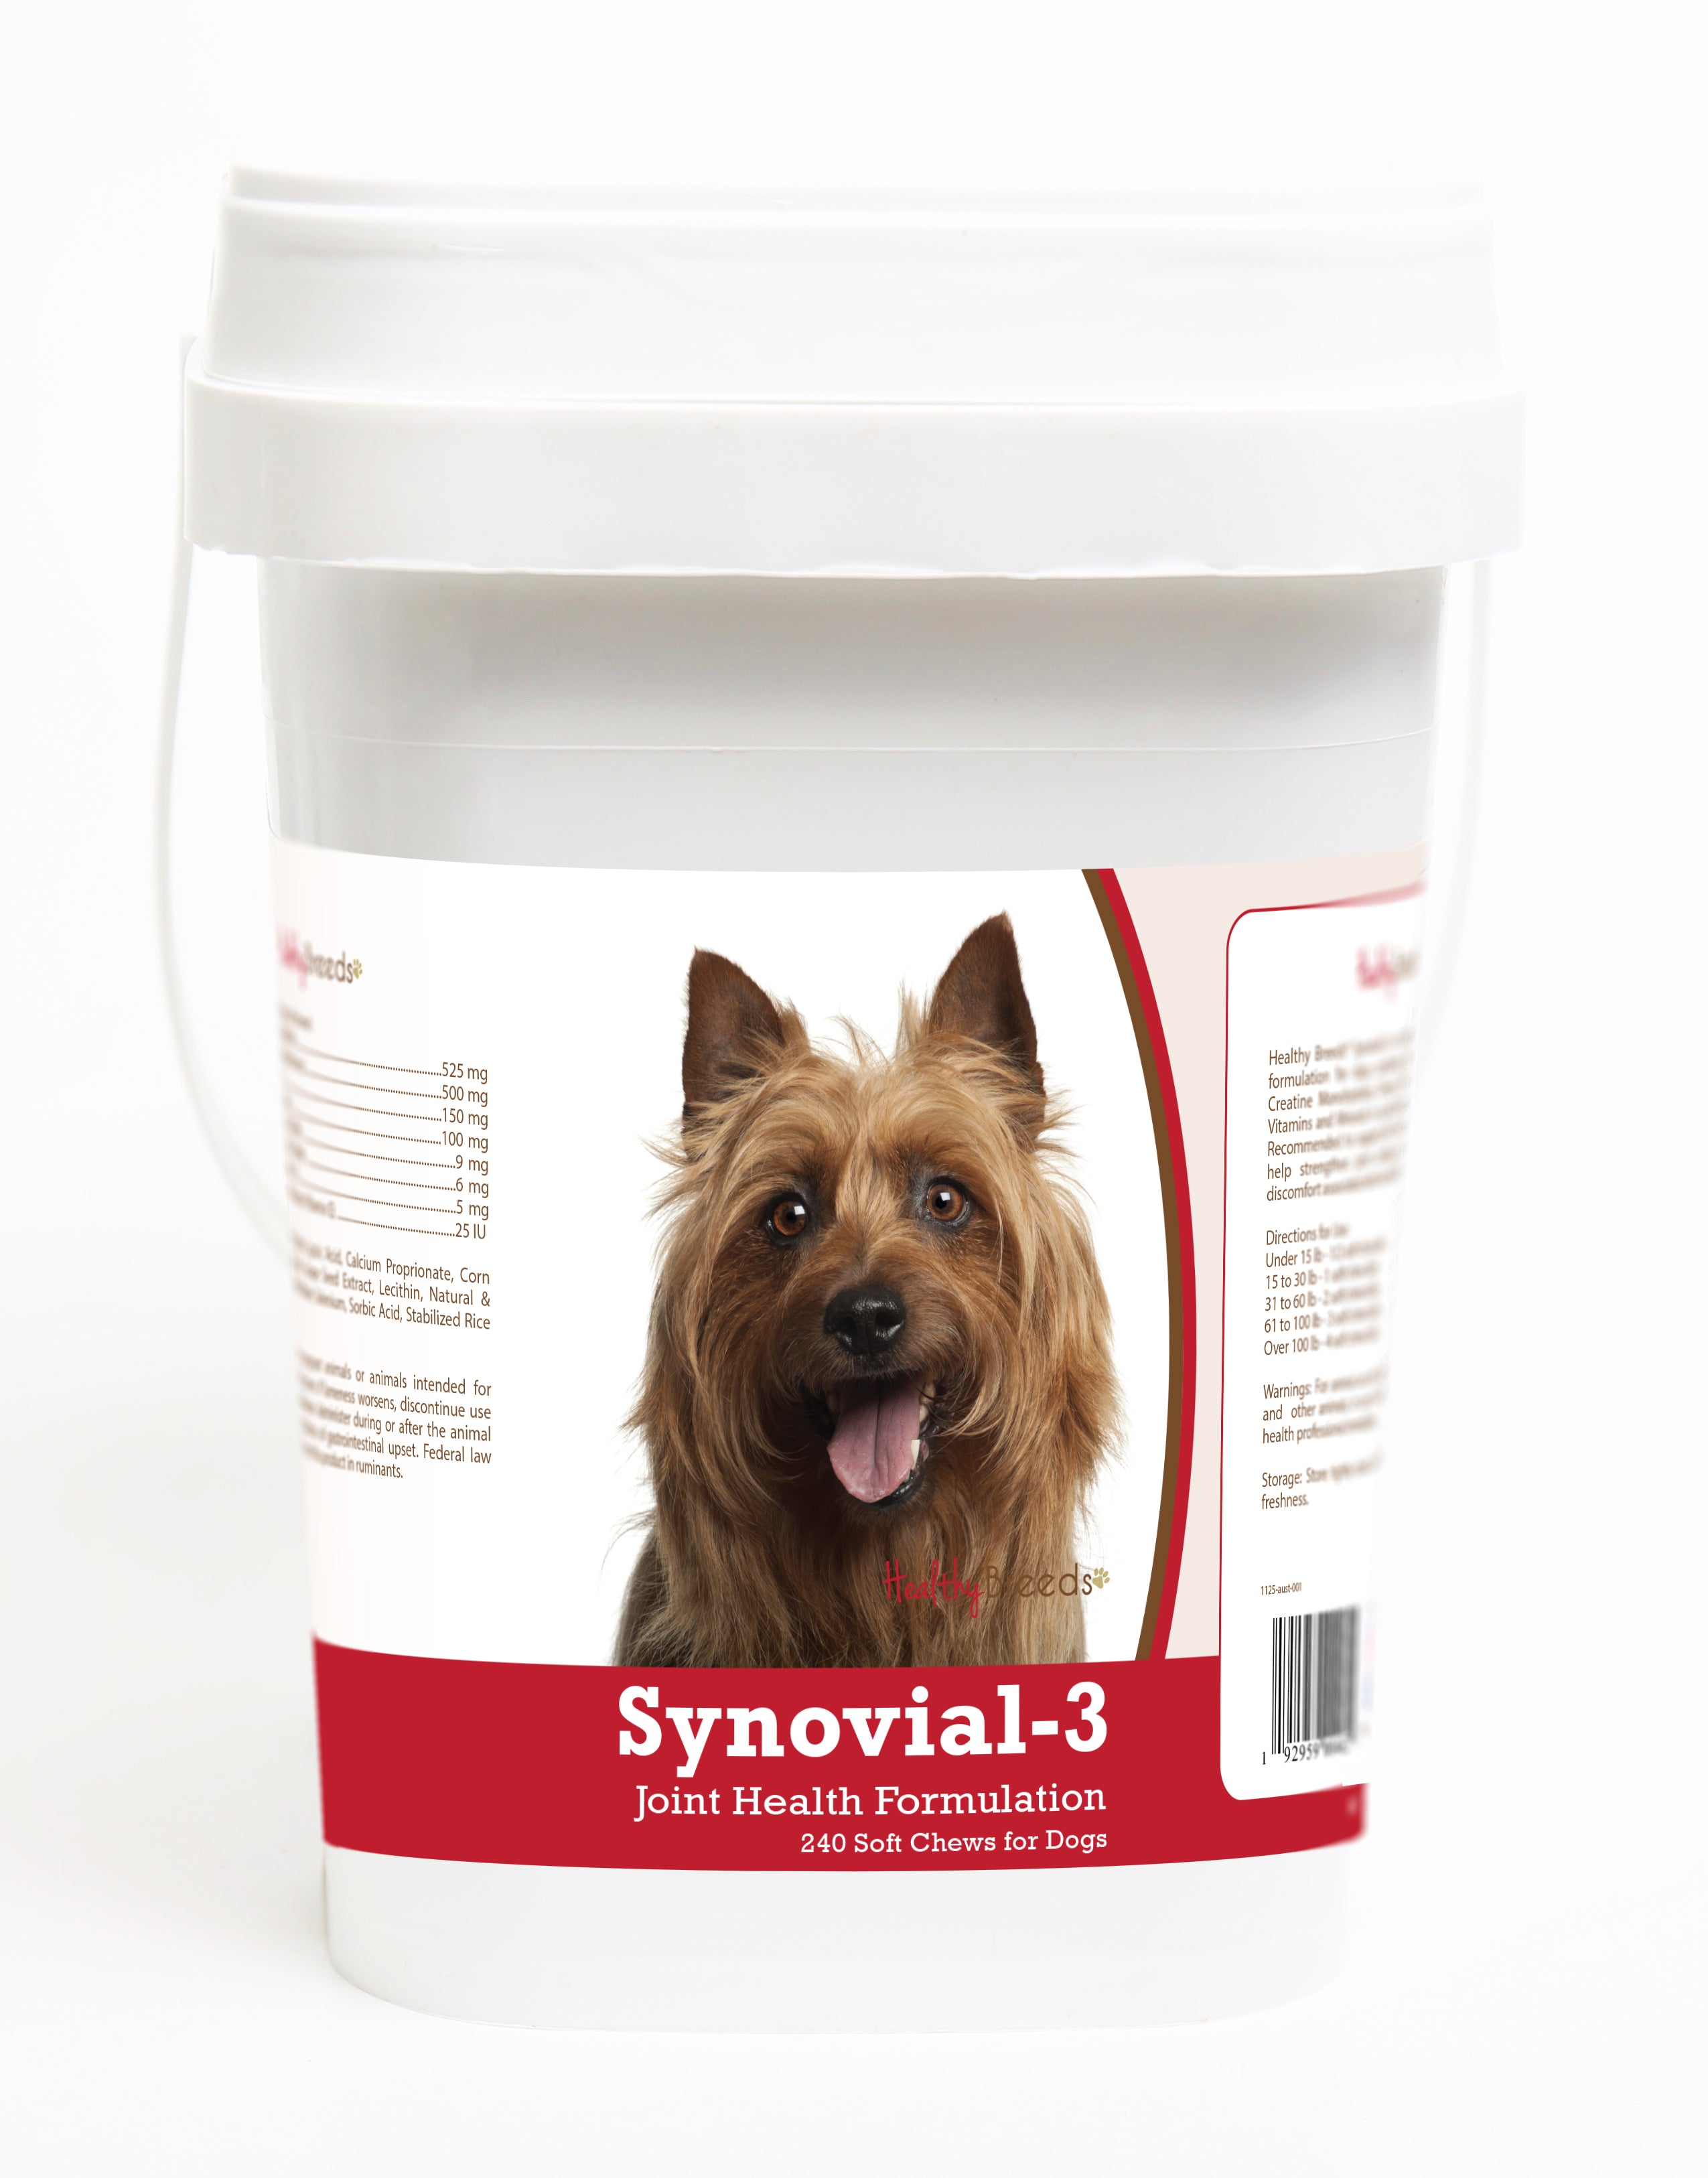 Australian Terrier Synovial-3 Joint Health Formulation Soft Chews 240 Count